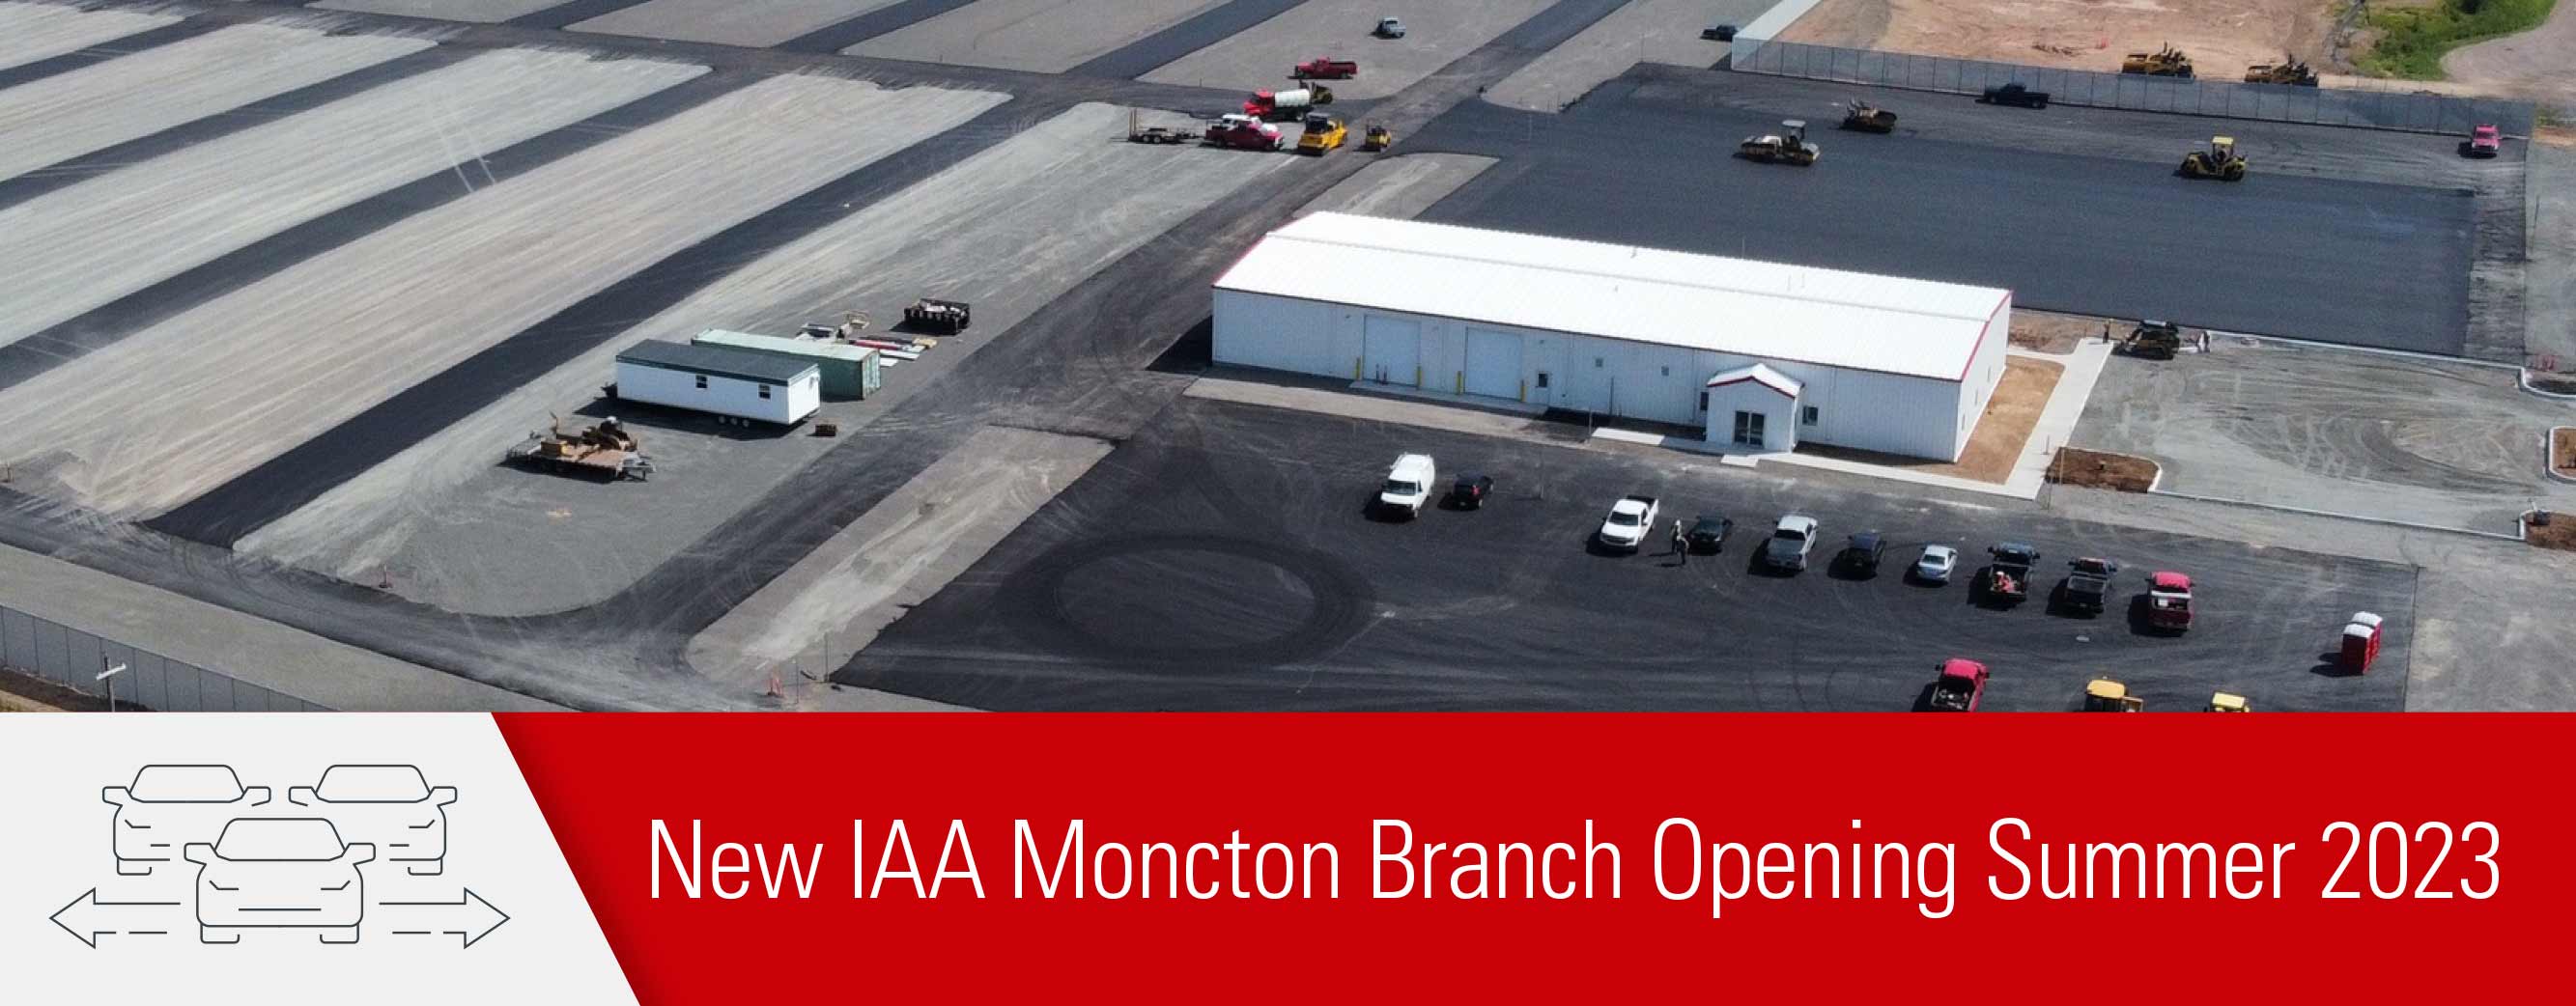 IAA in Canada Expansion Plans & Daily Auctions 